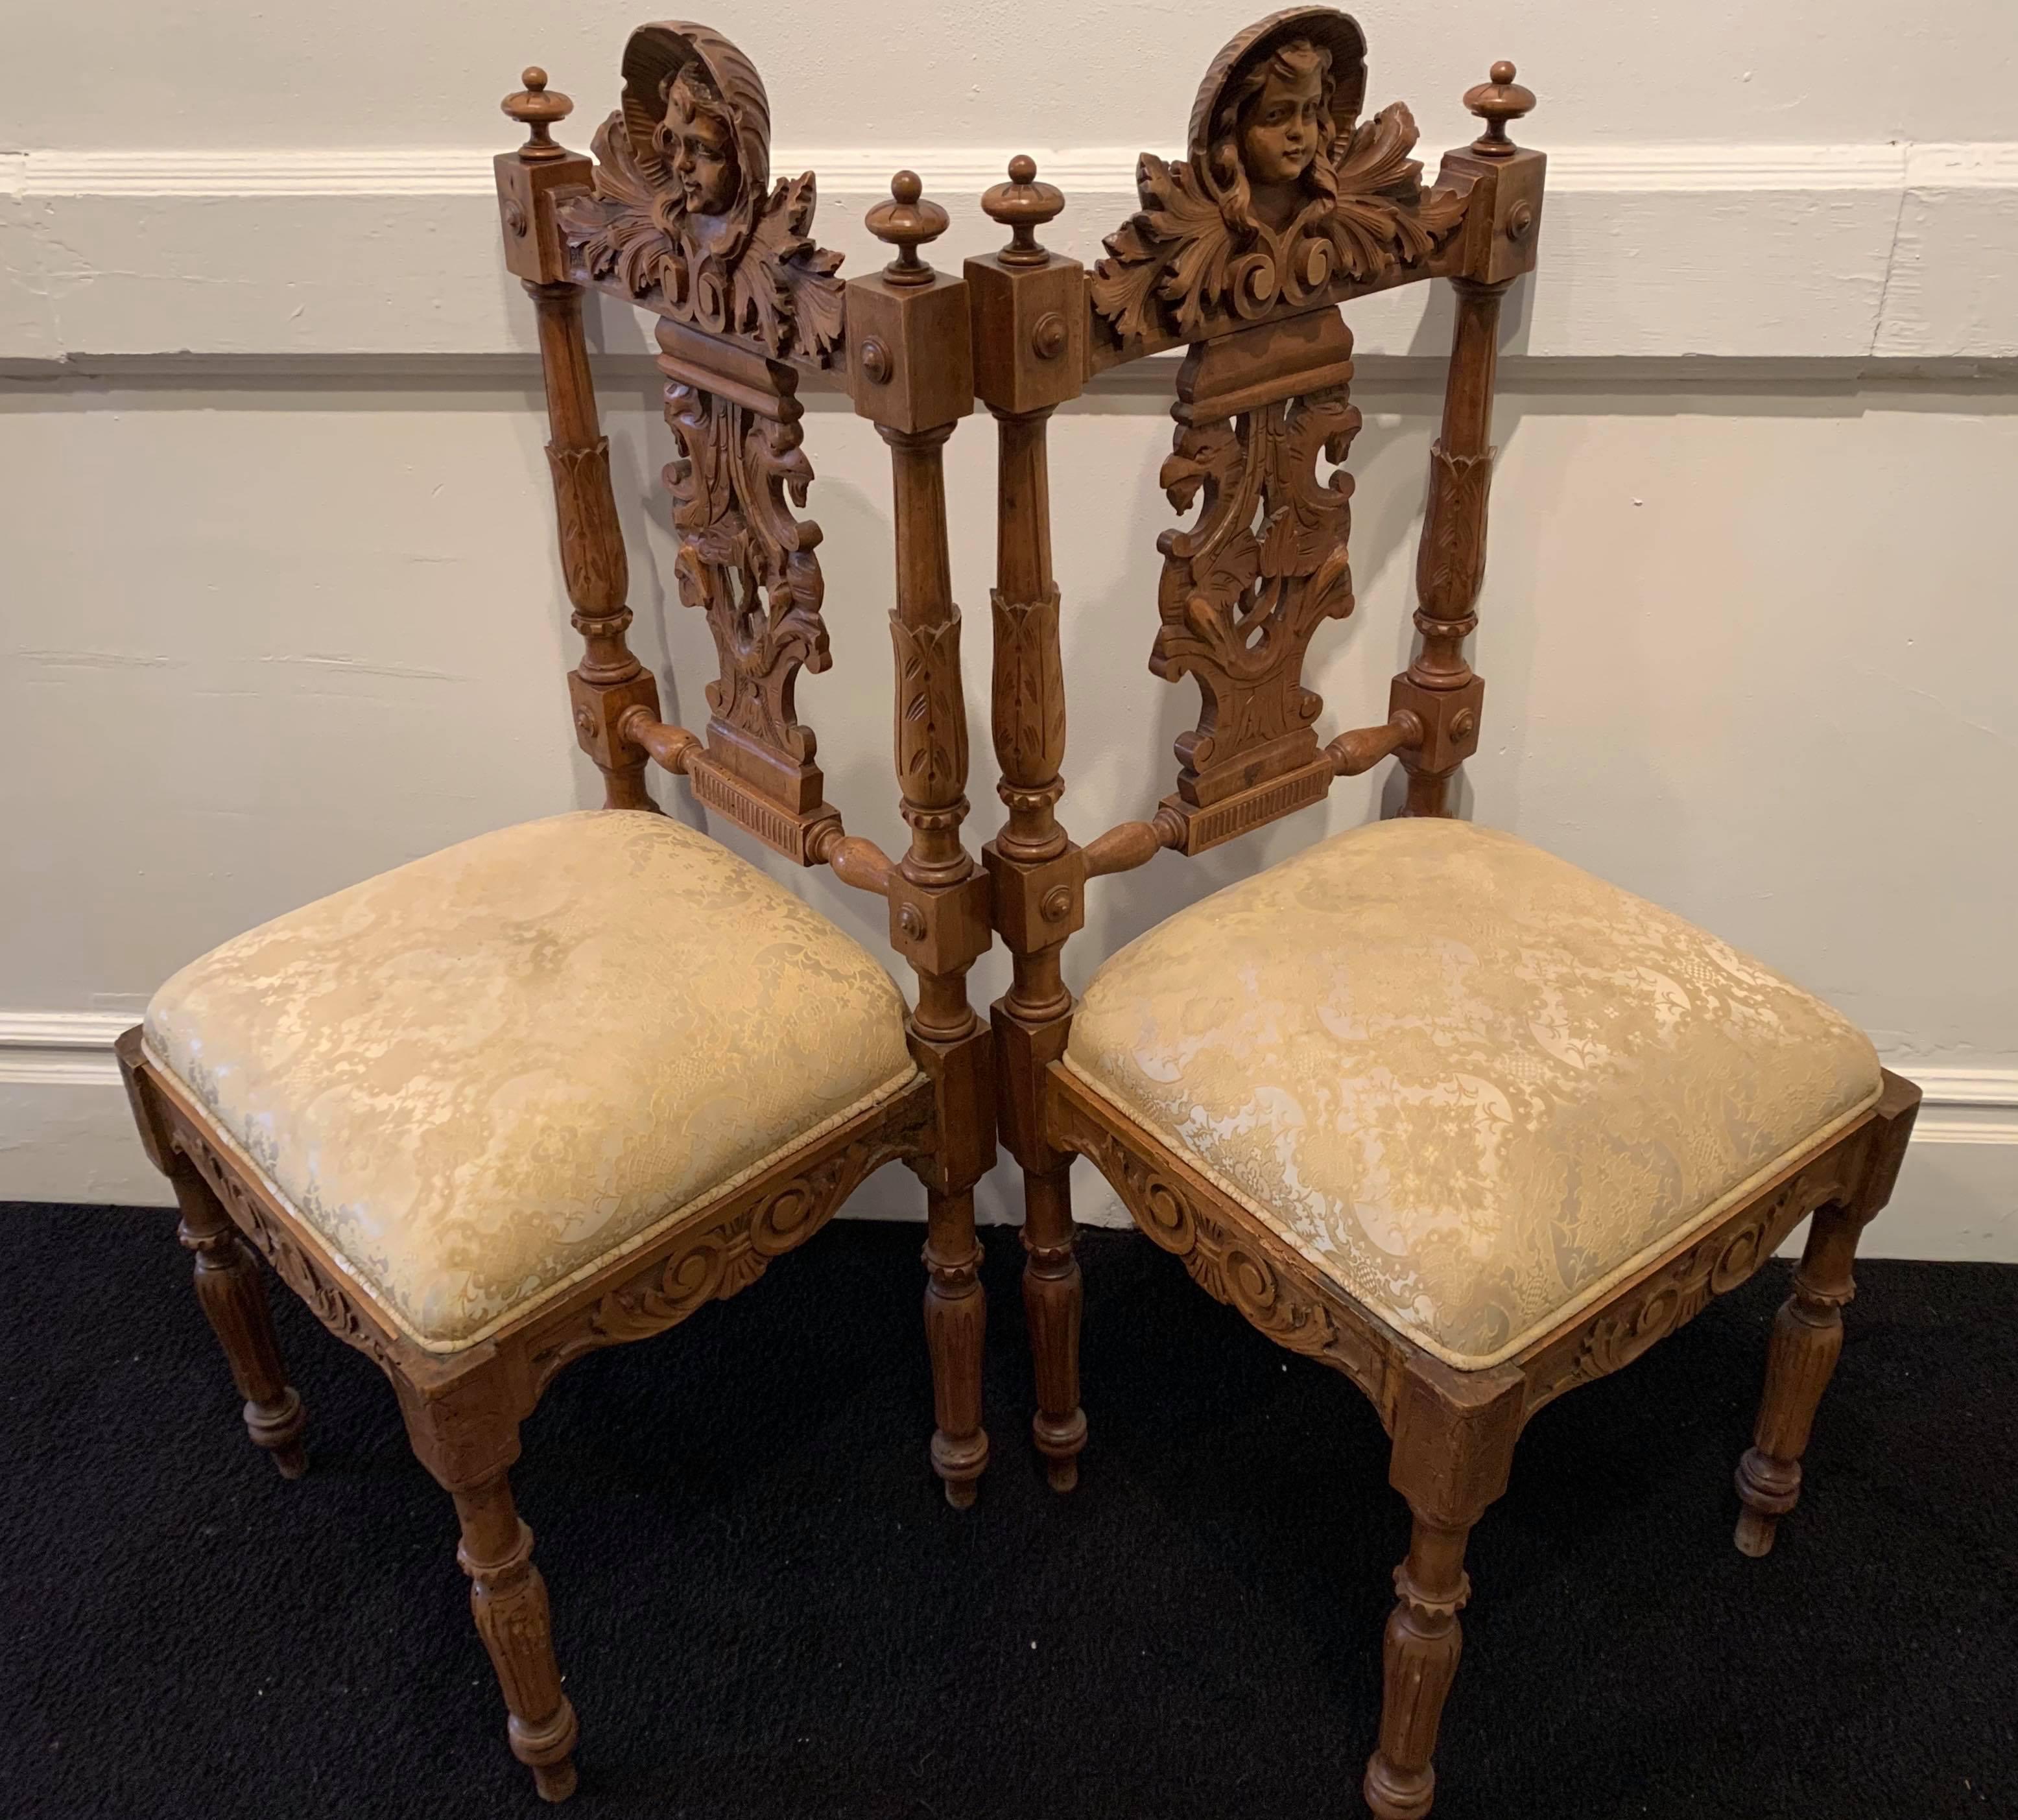 19th Century Pair of Hand-Carved Hall Chairs from Mexico - Renaissance Sculpture by Unknown